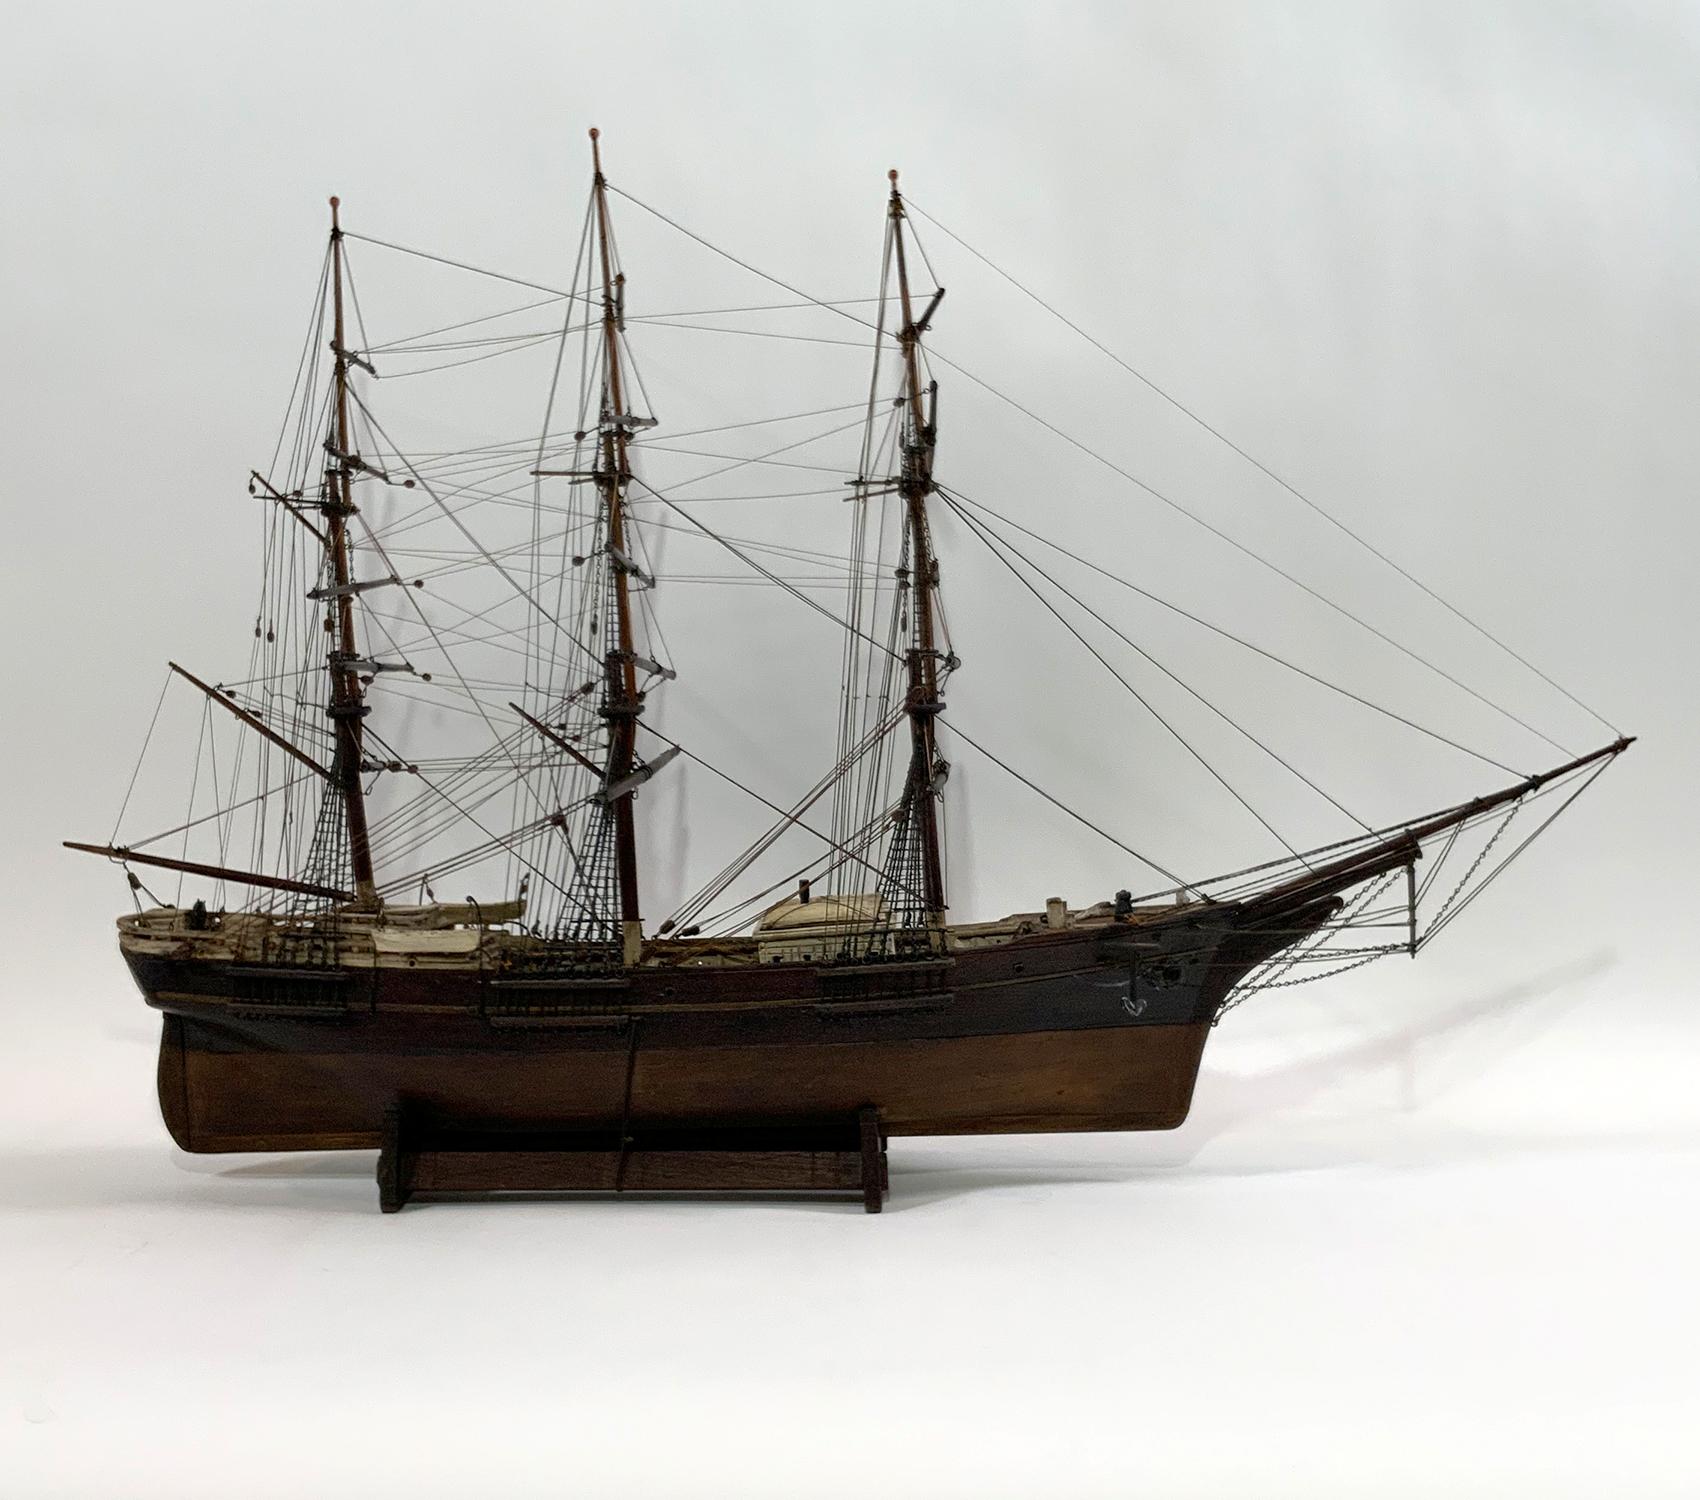 Fine period model showing a classic windjammer. Carved lifeboats hang from davits. Two more lifeboats are on the cabin roof. Scribed and varnished deck. Rigged with a full set of standing and running cords. Interesting carved cradle with extra